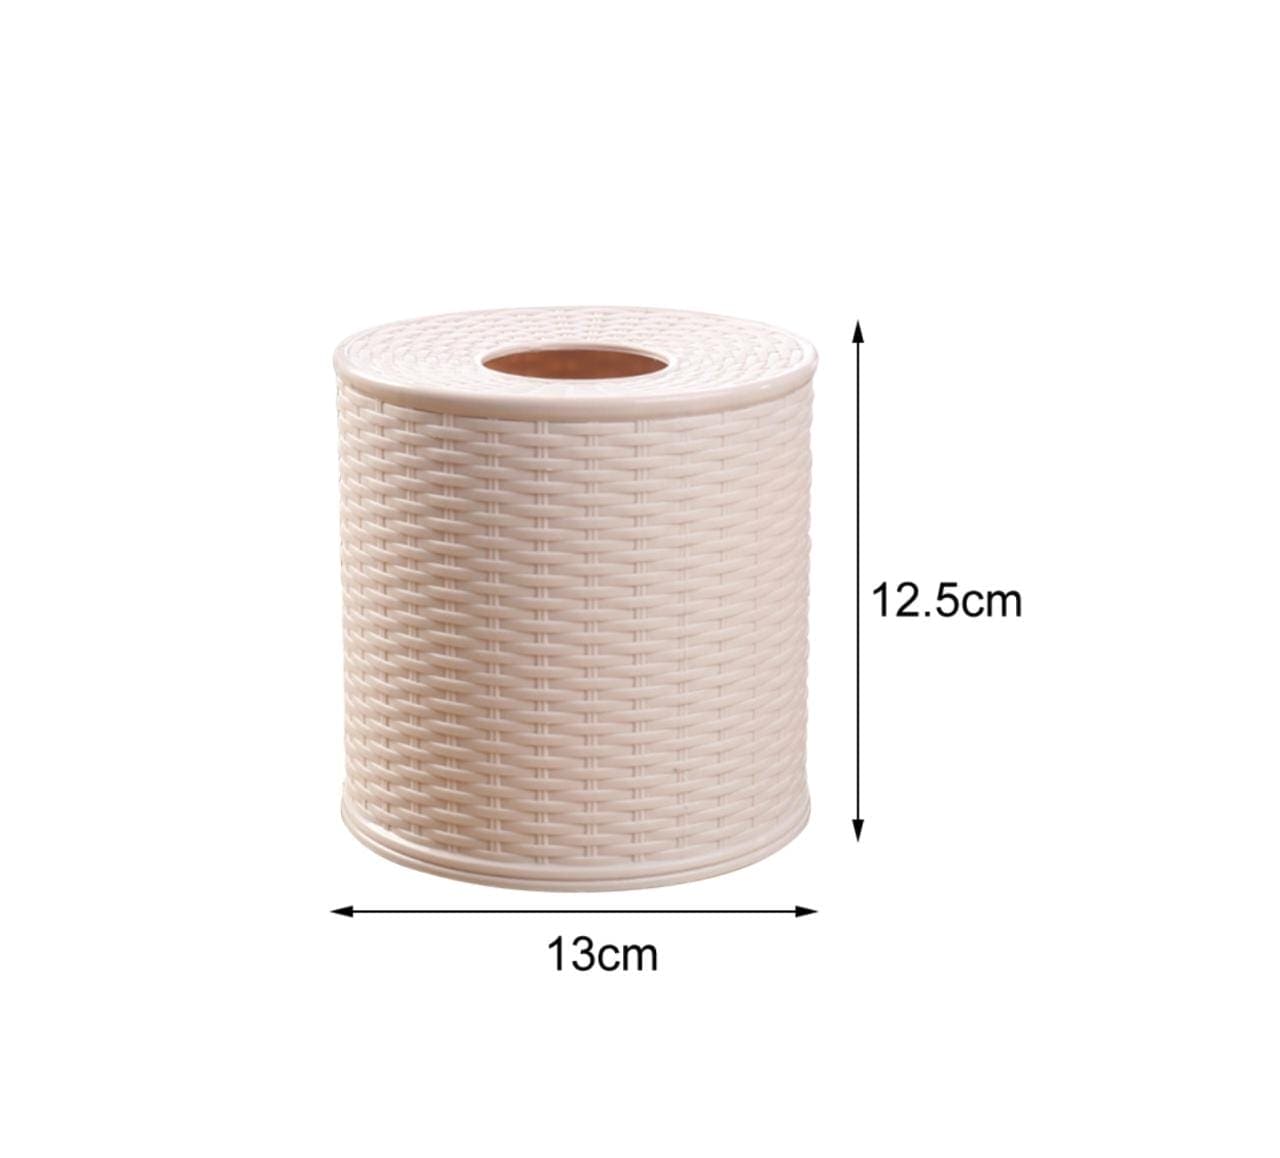 Round Container For Tissue, Living Room Bedroom Napkin Holder, Home Toilet Paper Storage Container, Dustproof Hotel Decorative Tissue Box